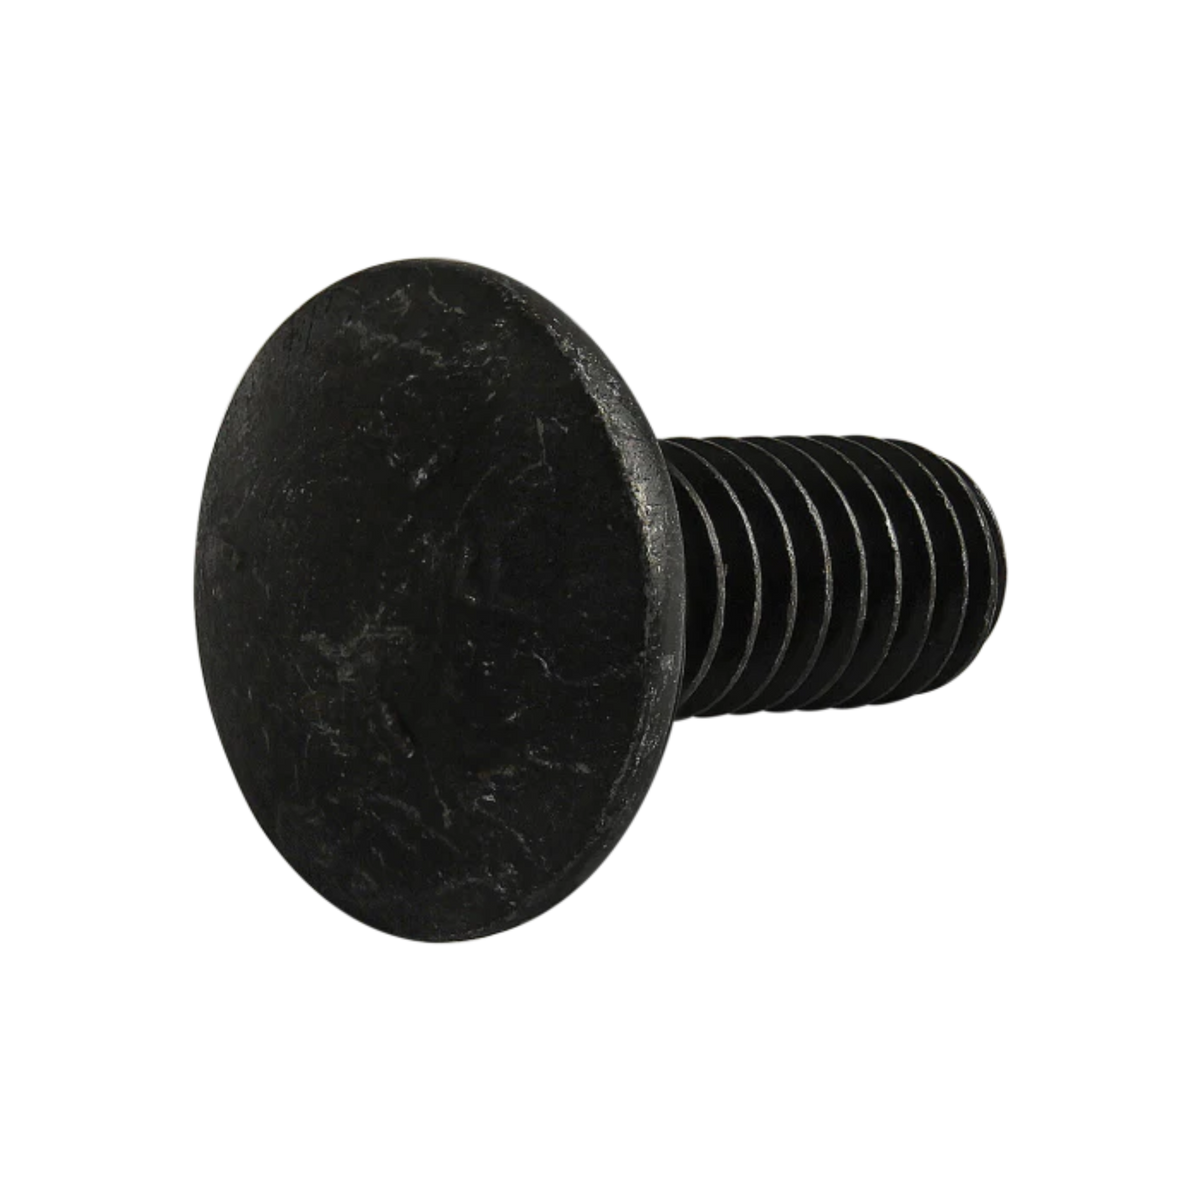 side view of a black t-slot stud with a flat rounded head on the left and a threaded stem on the right